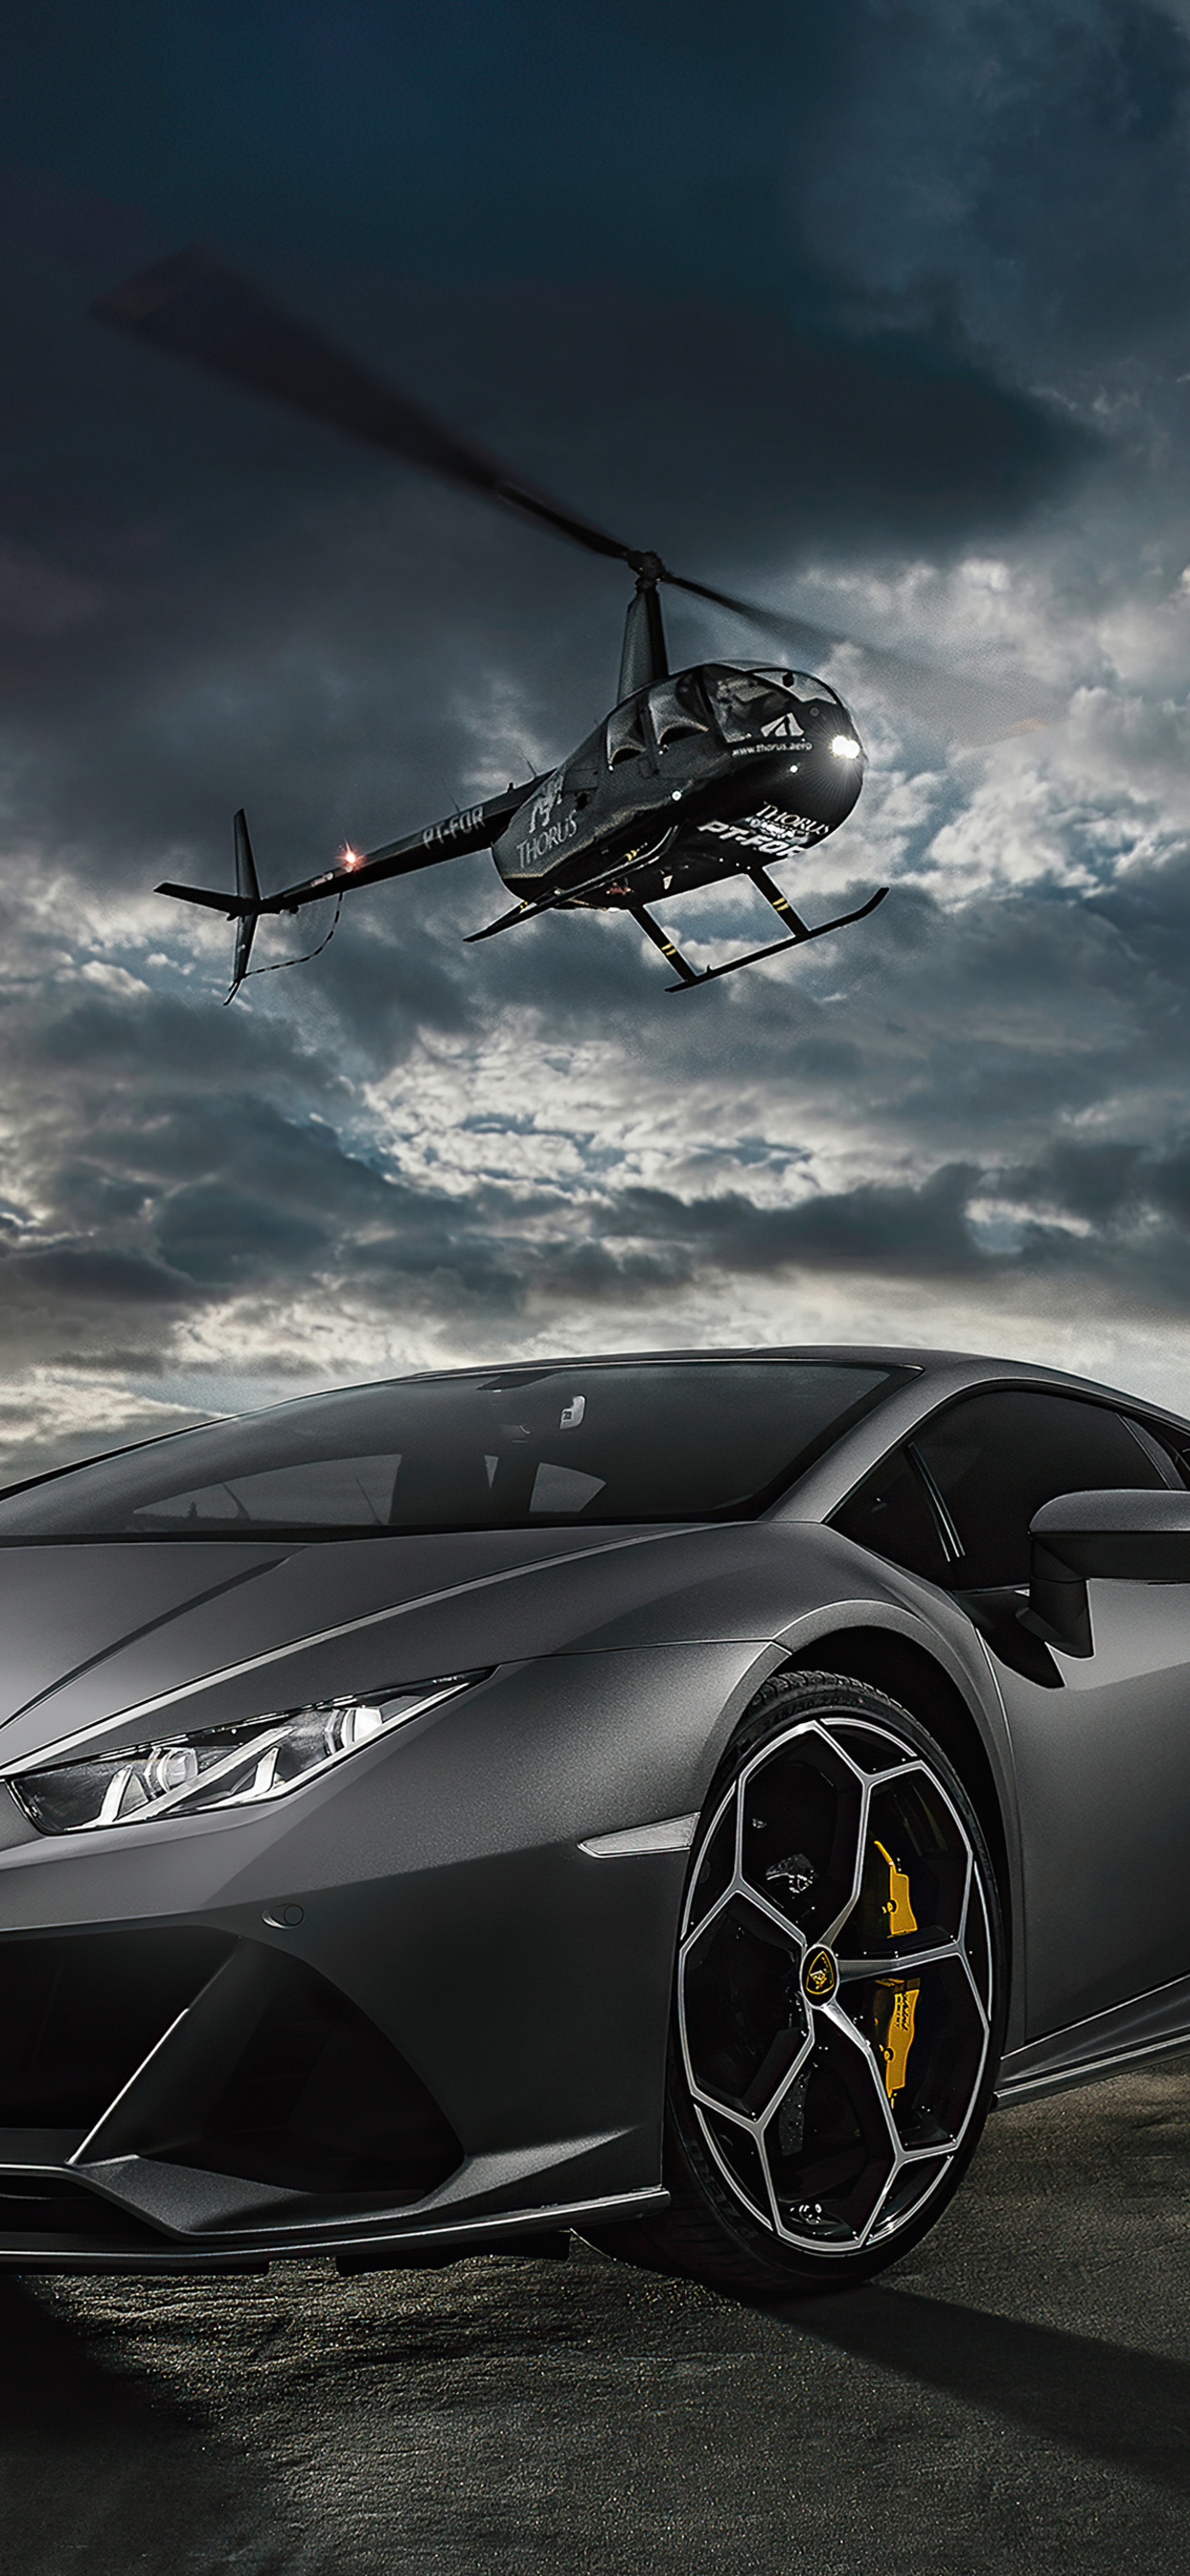 Lamborghini Huracan Evo, Helicopter aerial views, High-quality wallpapers, Luxury and speed, 1250x2690 HD Phone